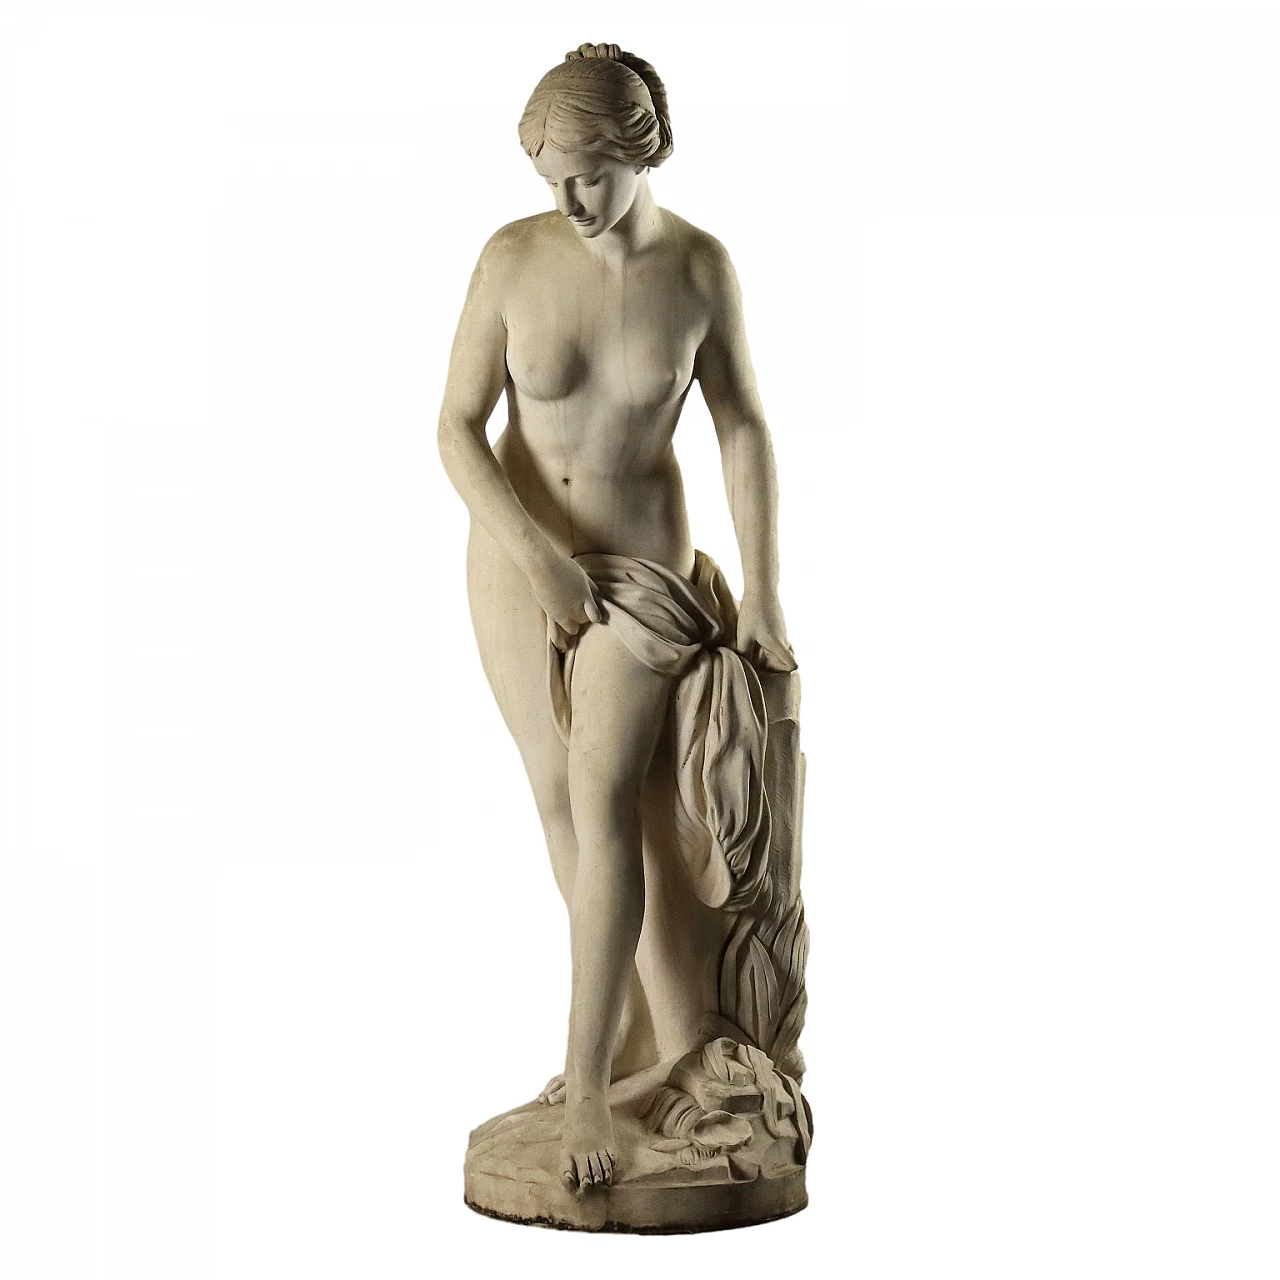 Dal Torrione, The bather, sythetic marble sculpture 1